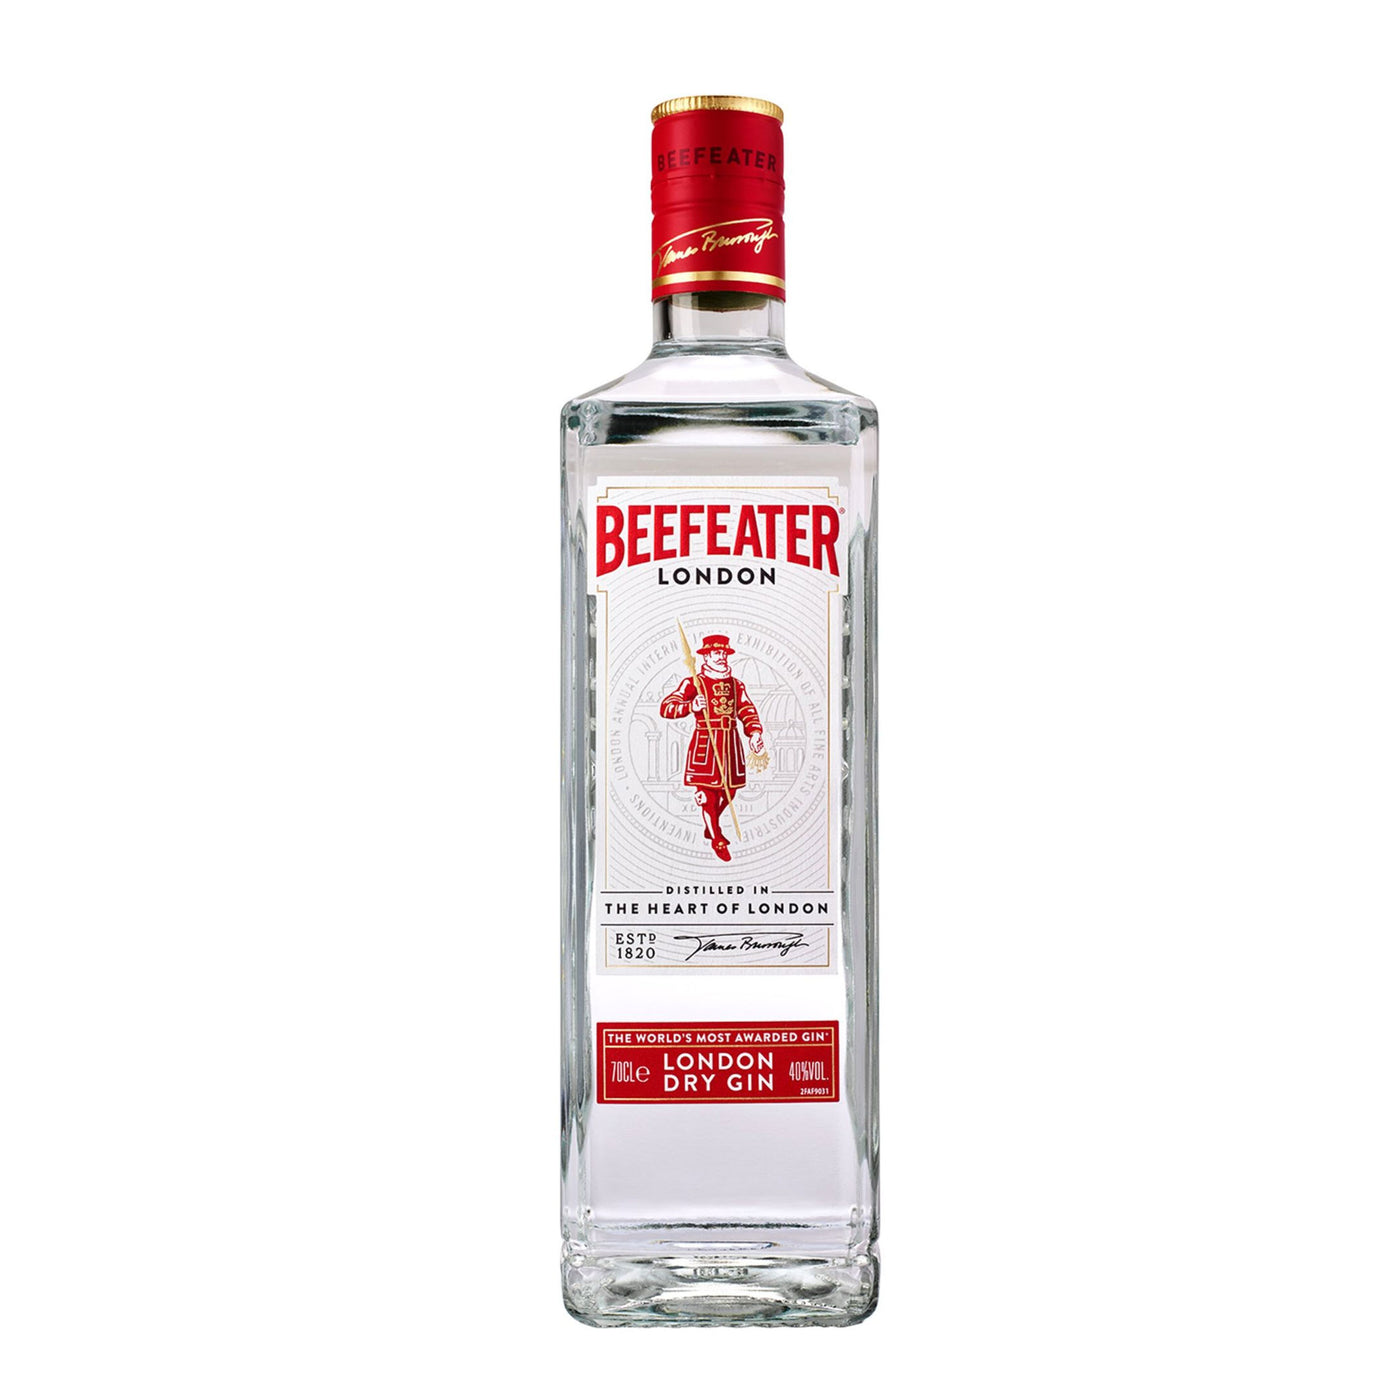 Beefeater Gin - Spiritly